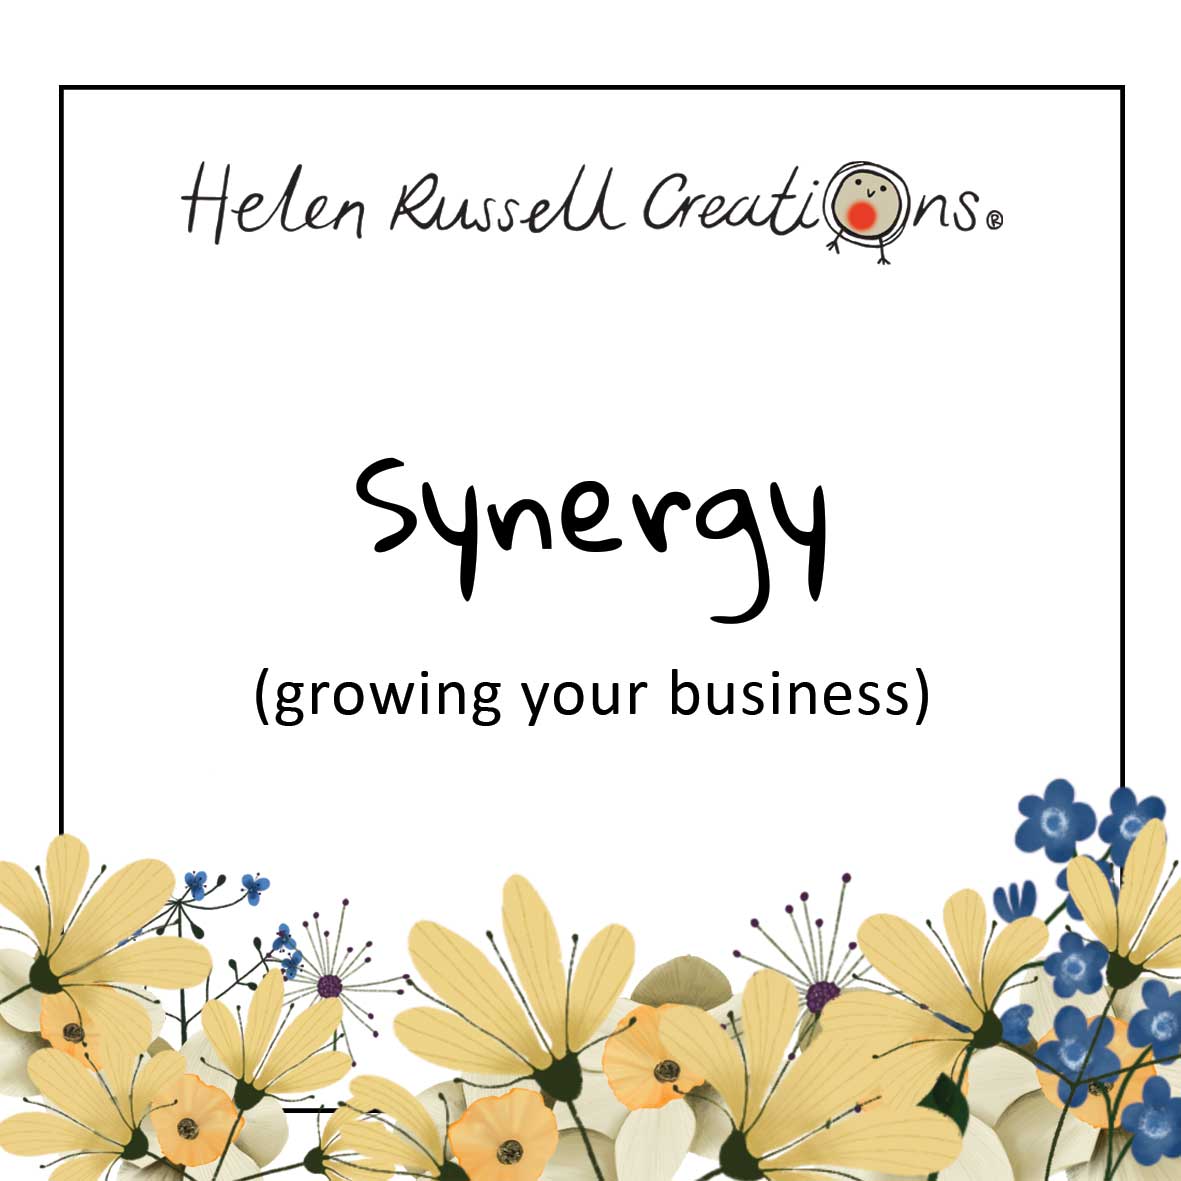 Synergy, growing your business